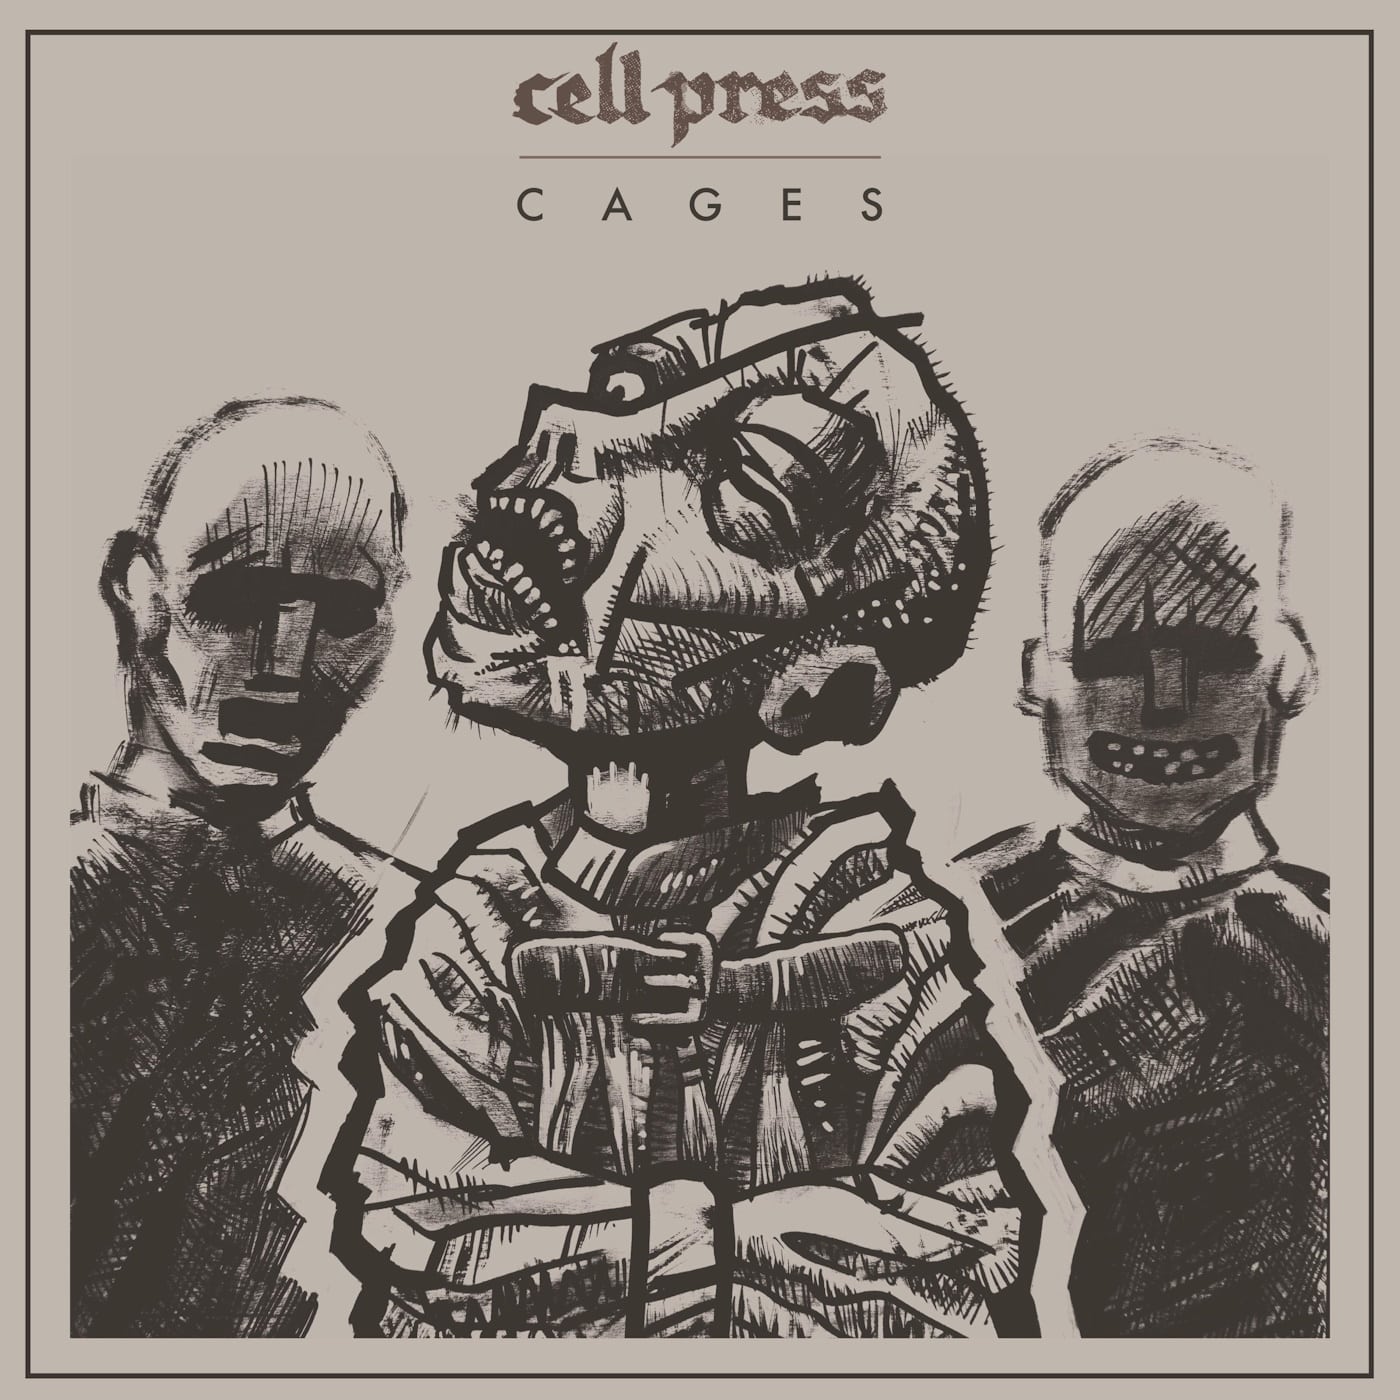 CELL PRESS